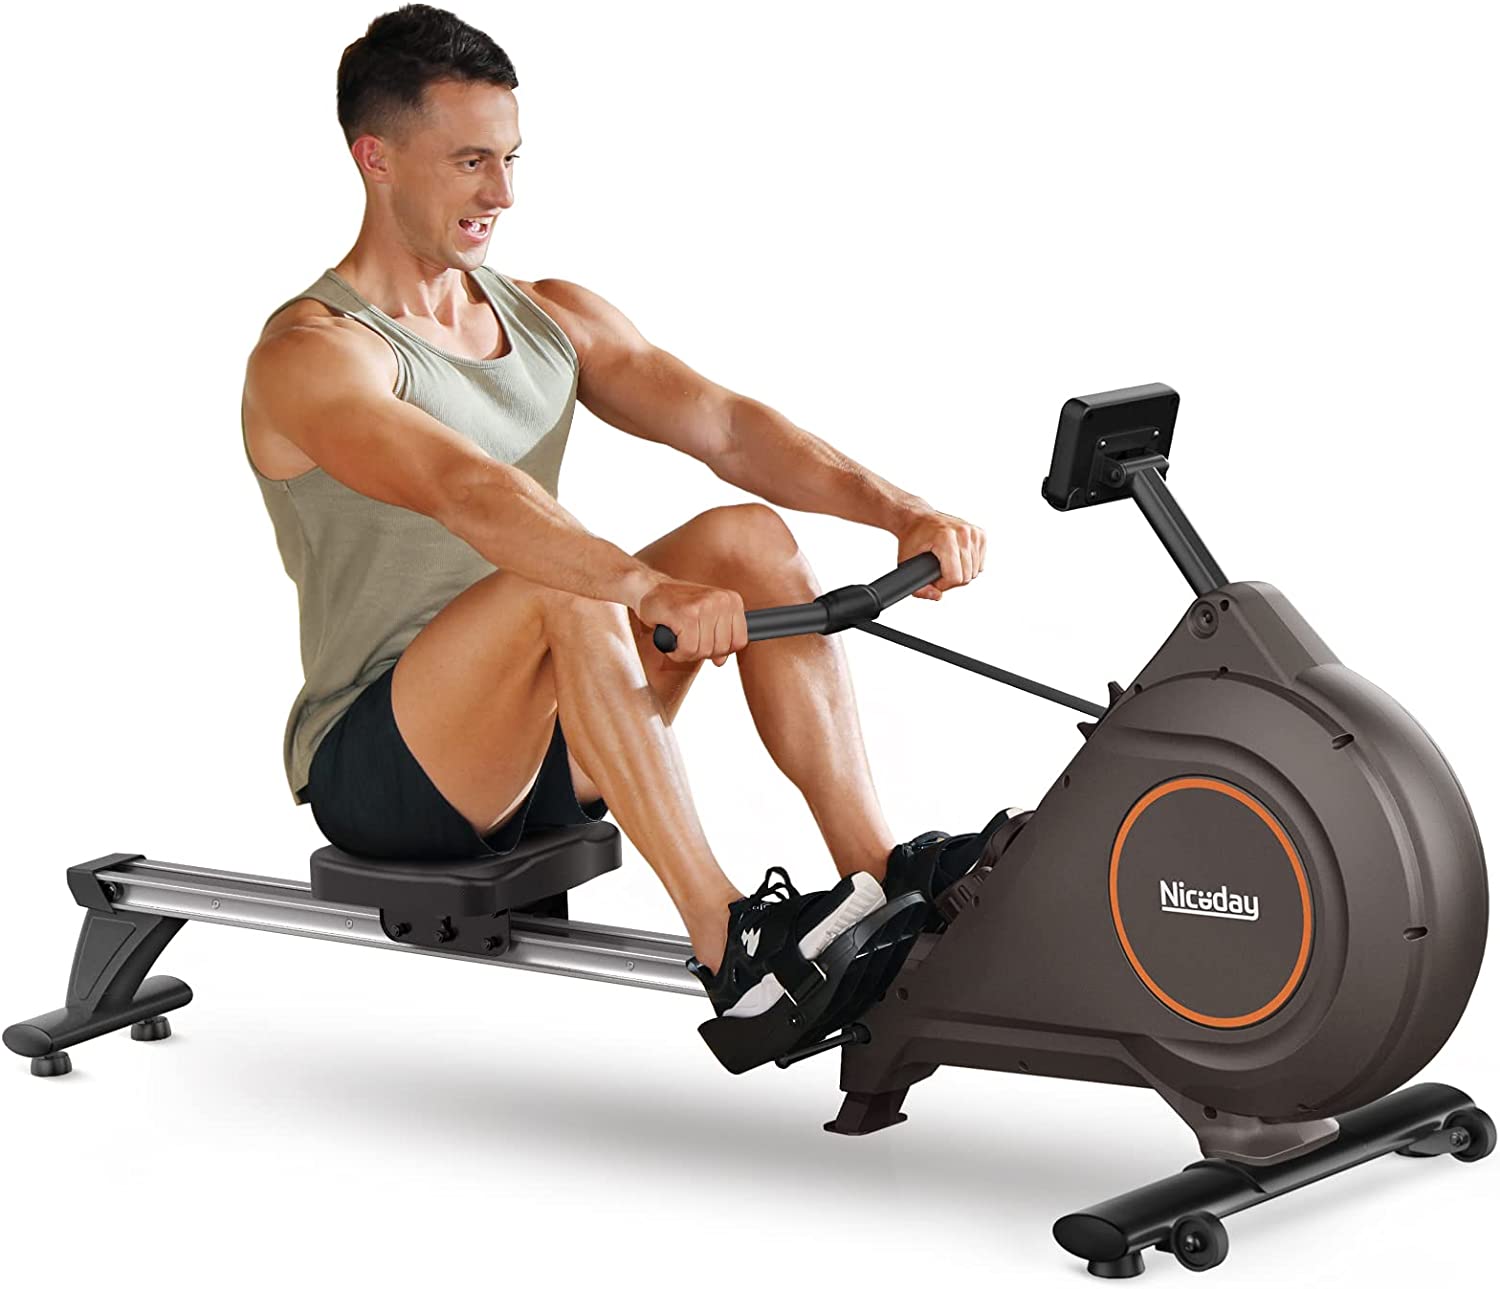 Hyper-Quiet Magnetic & Hydraulic Rower with16 Resistance Levels, 350LBS Loading Capacity